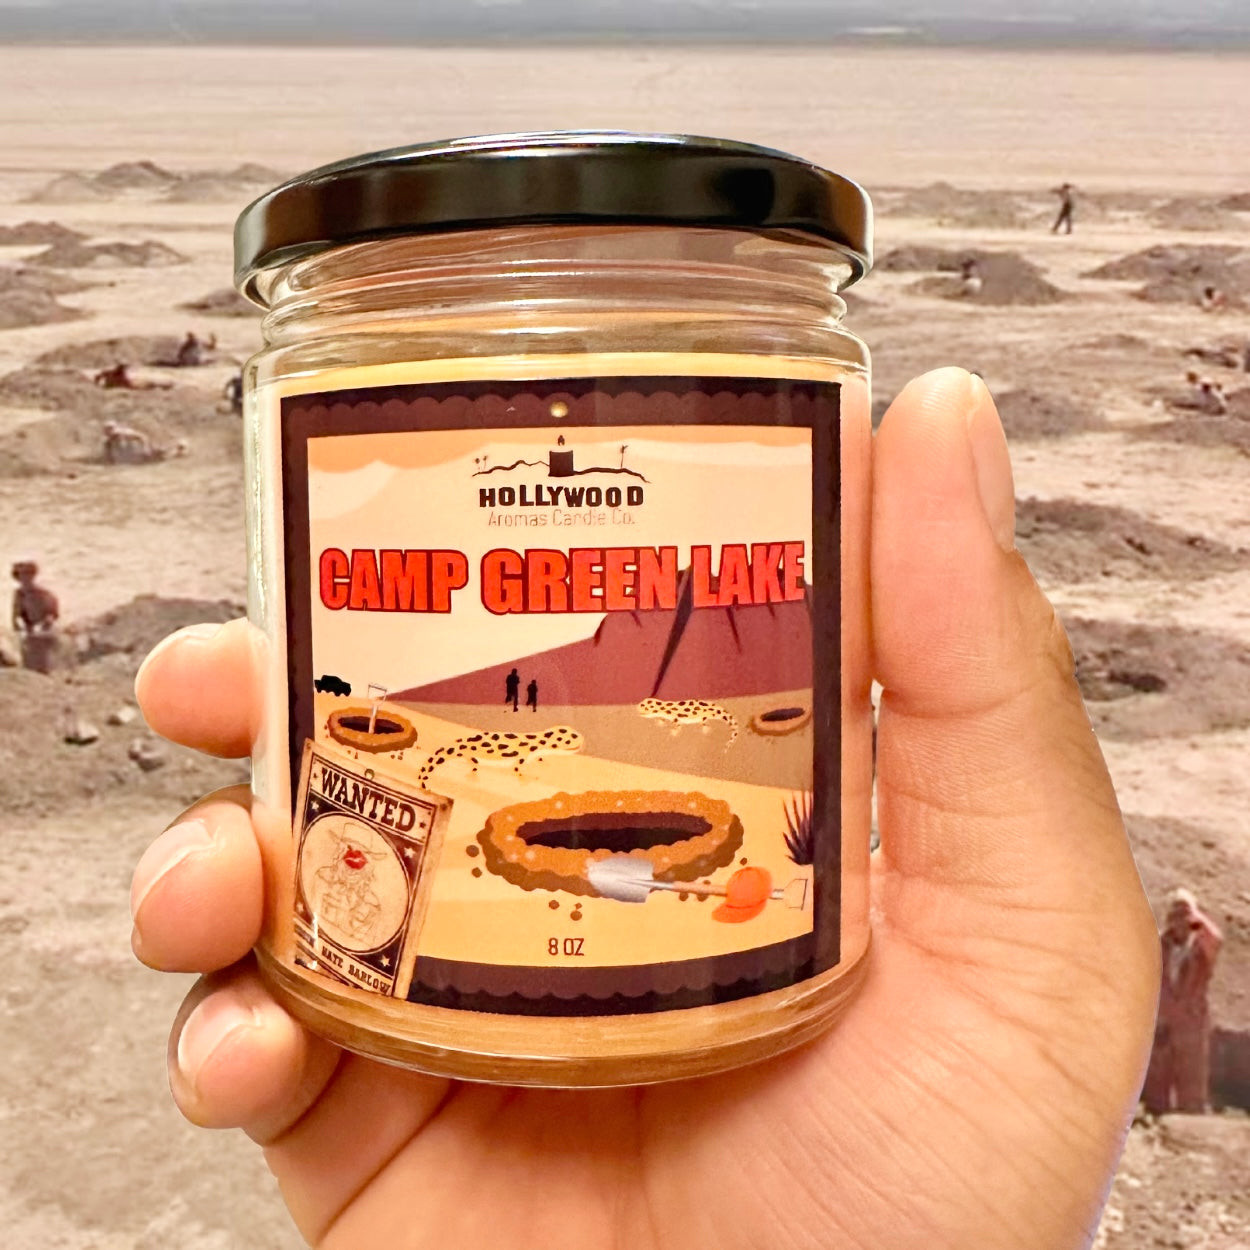 Holes Candle “Camp Green Lake” – Hollywood Aromas Candle Co.